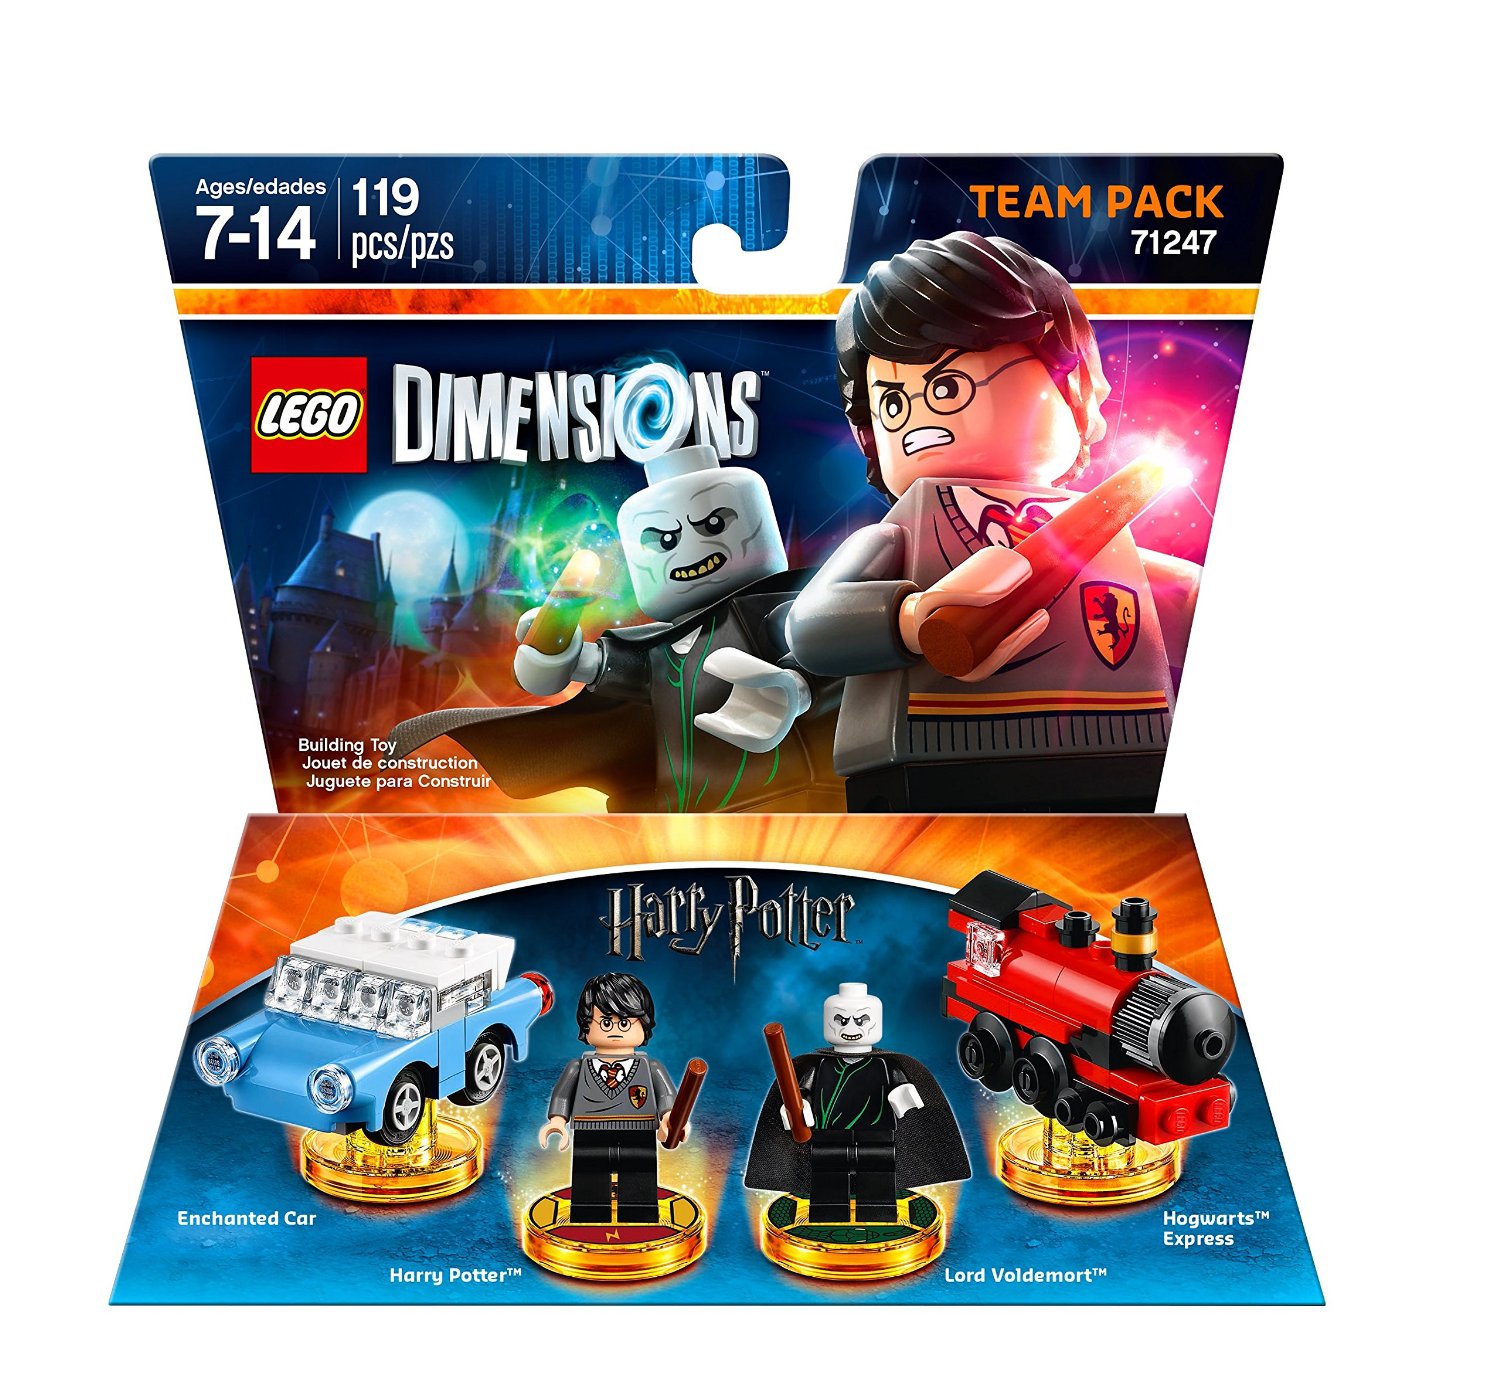 Lego Dimensions Pre-Orders – Harry Potter Team Pack and more – 40% Off!